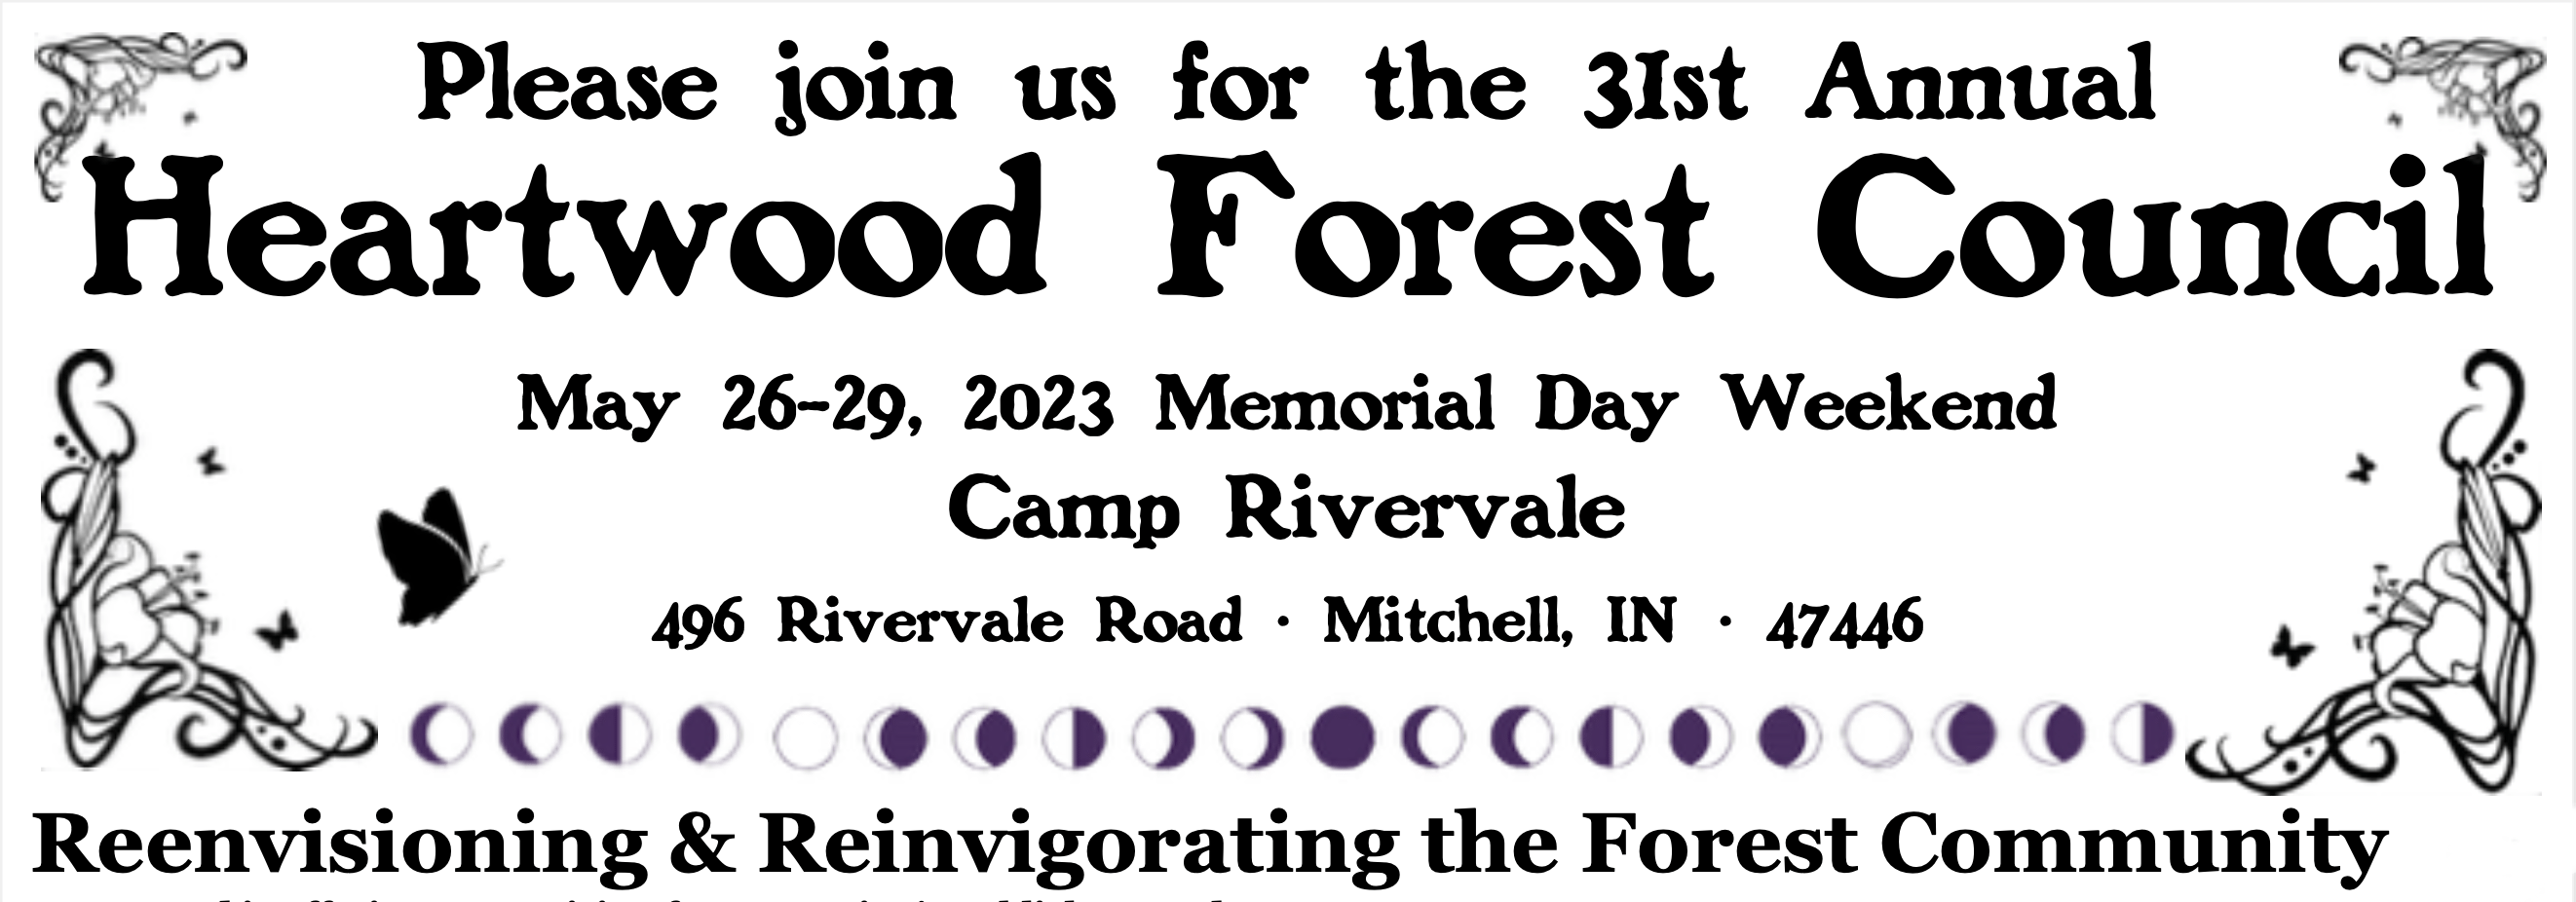 Please join us for 31st Annual Heartwood Forest Council May 26-29, 2023, Memorial Day Weekend at Camp Rivervale, 496 Rivervale Road, Michell, IN 47446